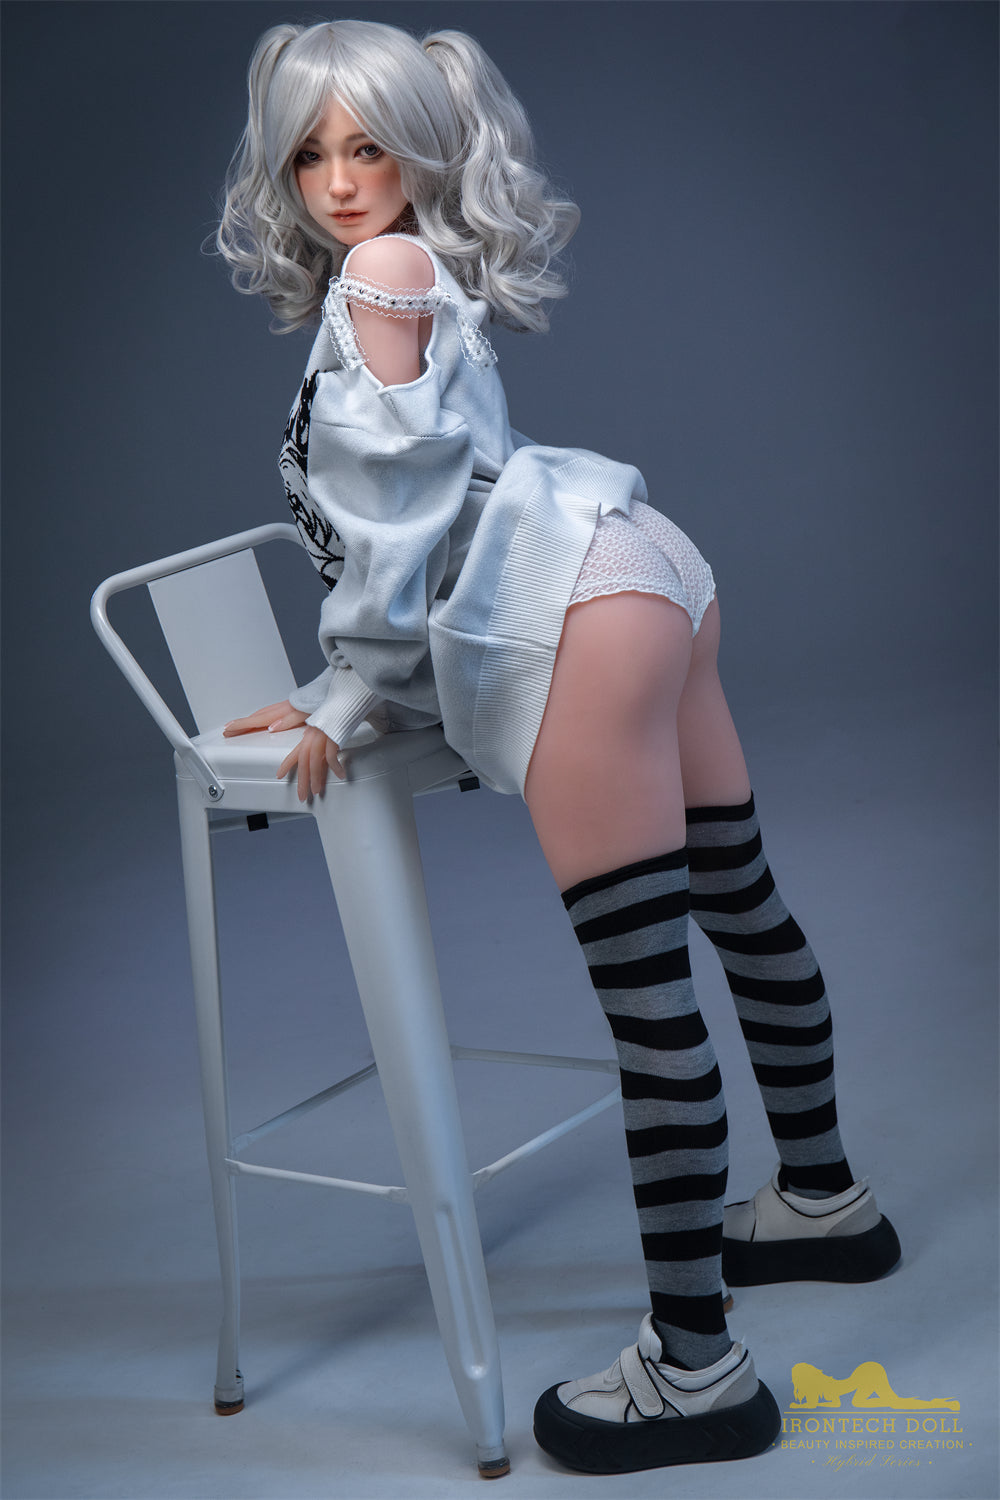 Irontech Doll 154 cm Silicone - Misa | Buy Sex Dolls at DOLLS ACTUALLY